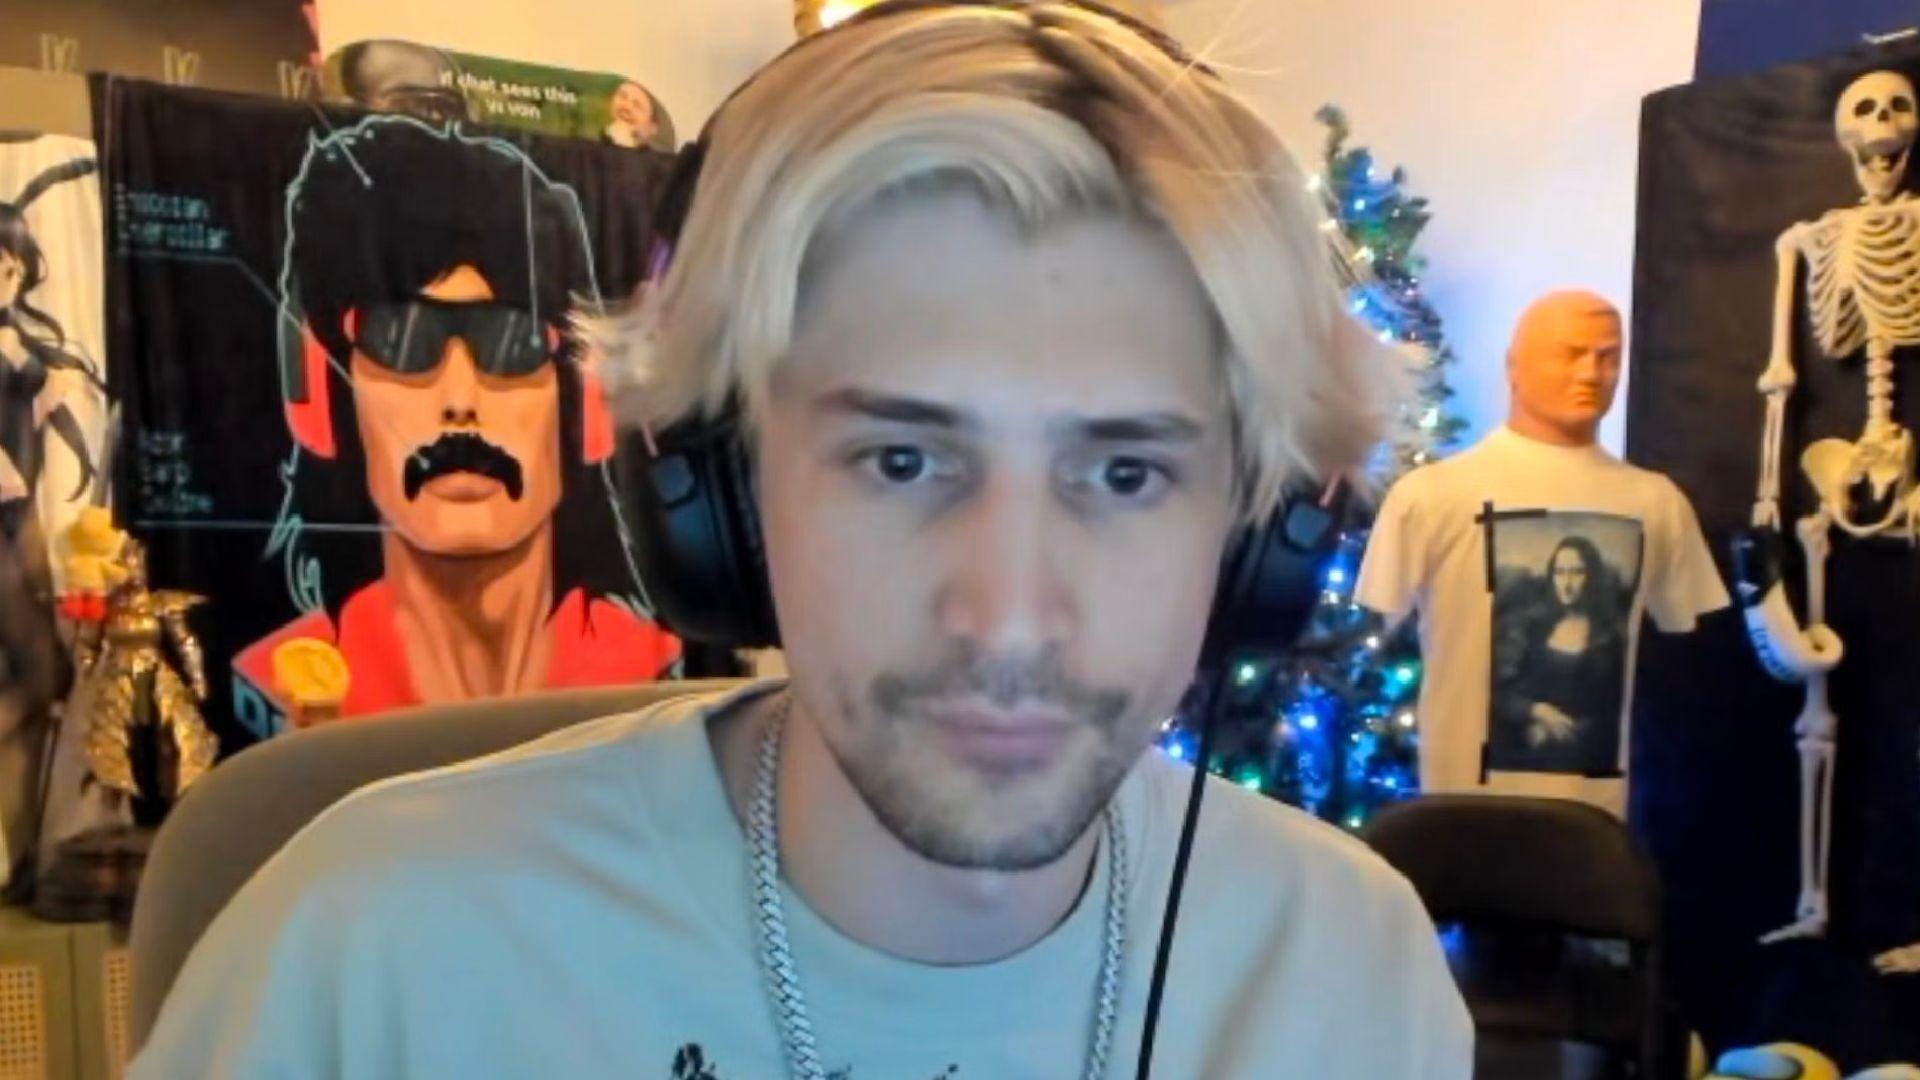 xQc in white shirt staring at camera